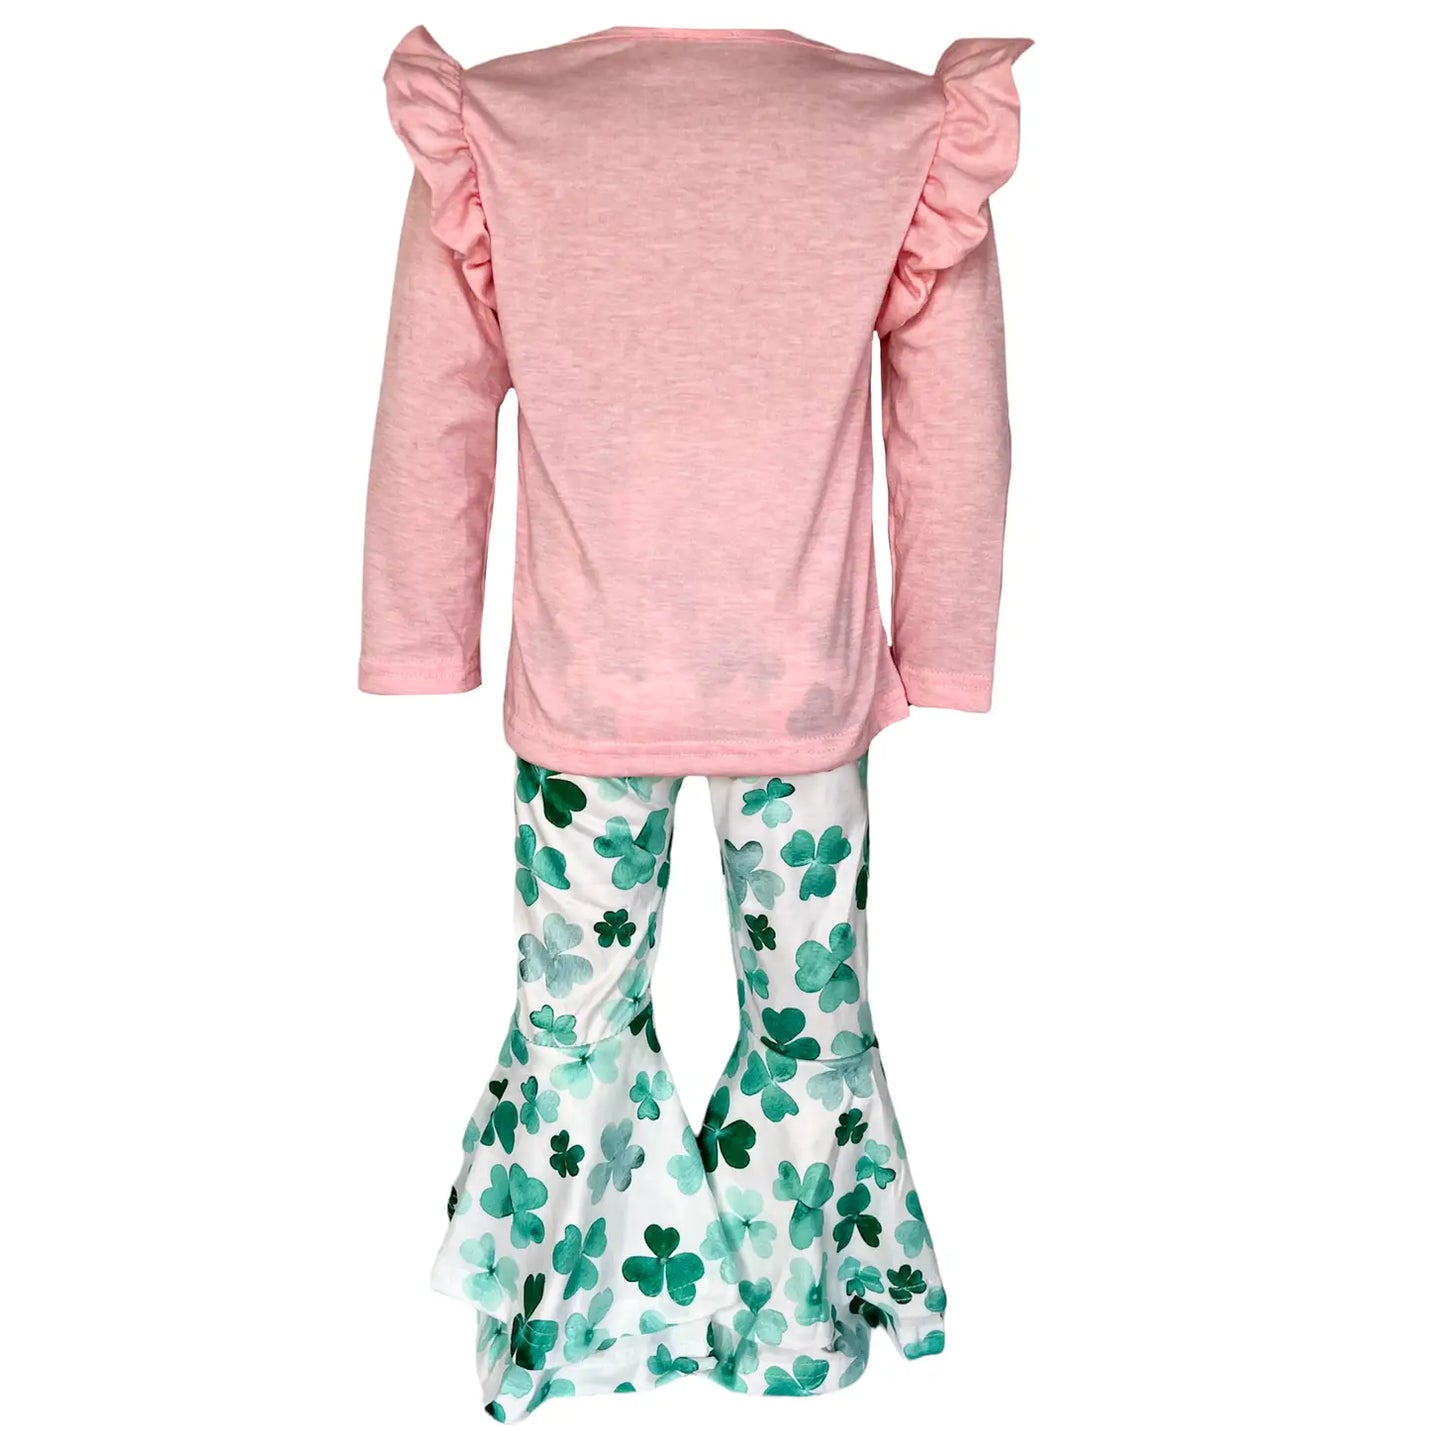 St Patricks Day Pink Green Clover 2 pc Holiday Outfit Set